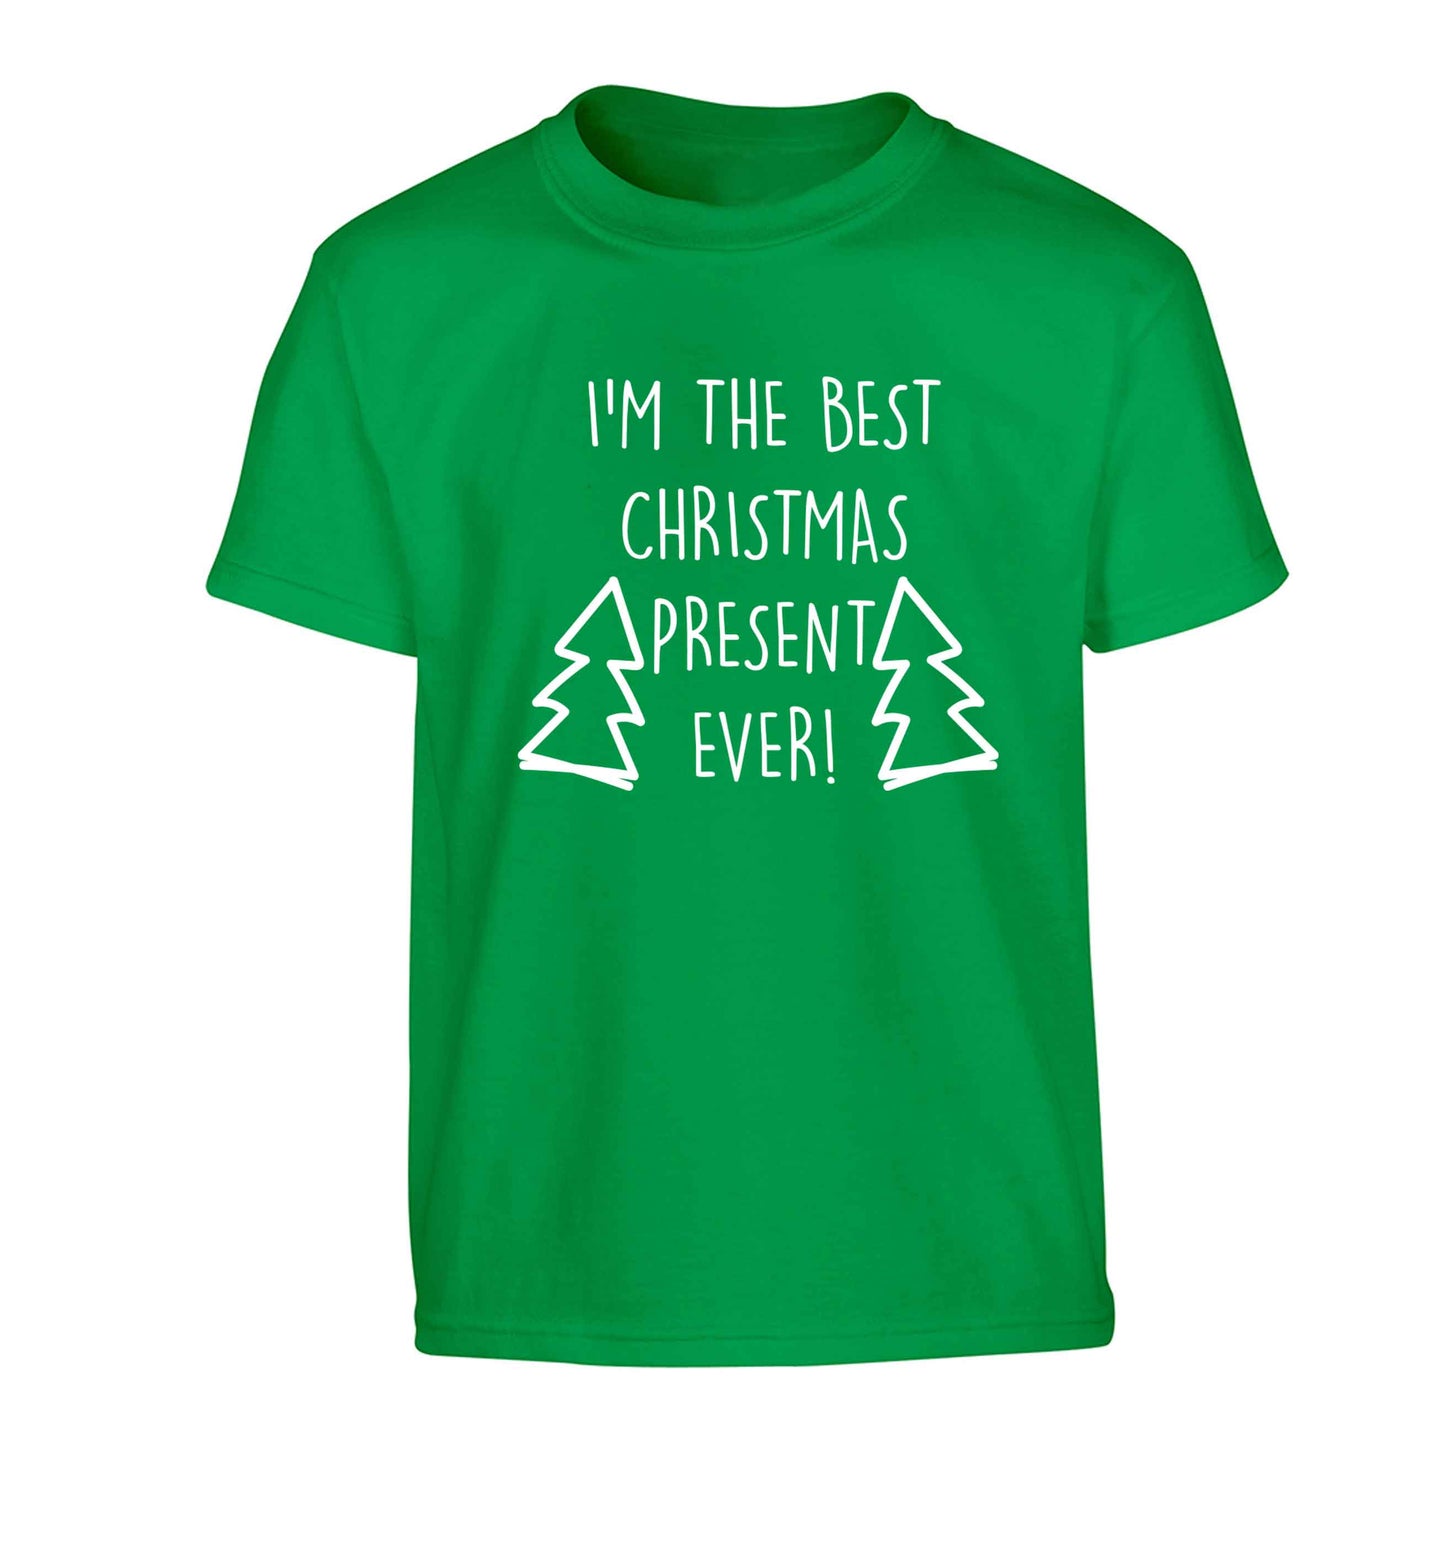 I'm the best Christmas present ever Children's green Tshirt 12-13 Years